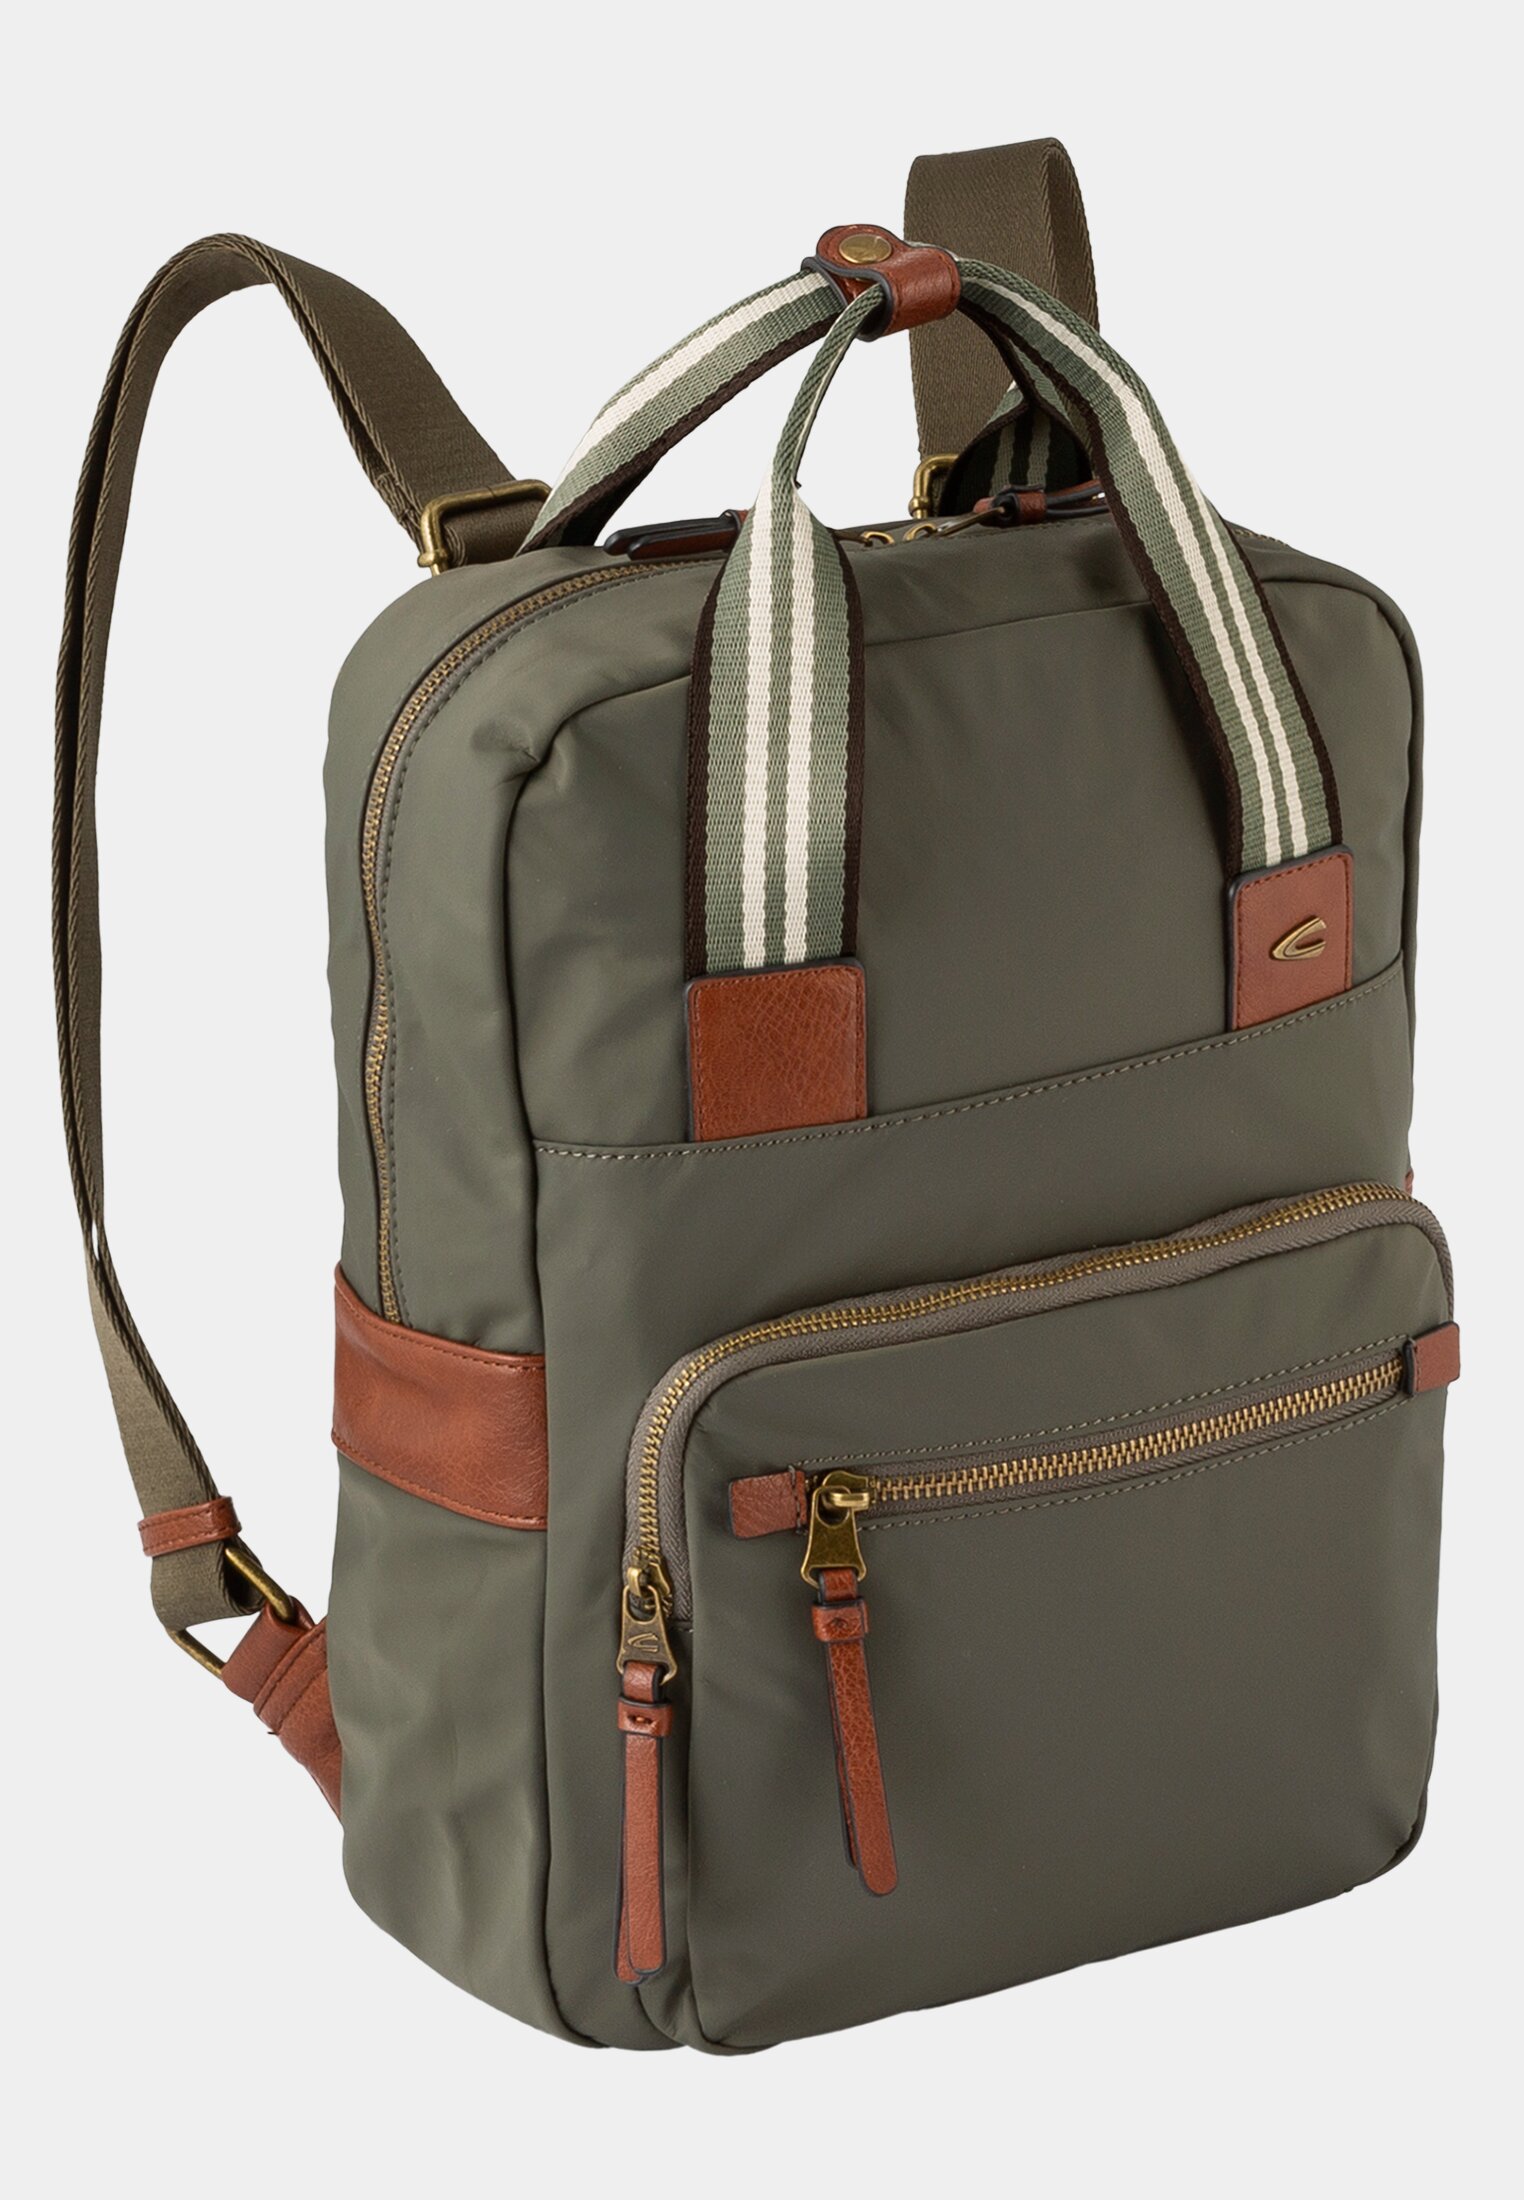 Camel Active Backpack with imitation leather trim